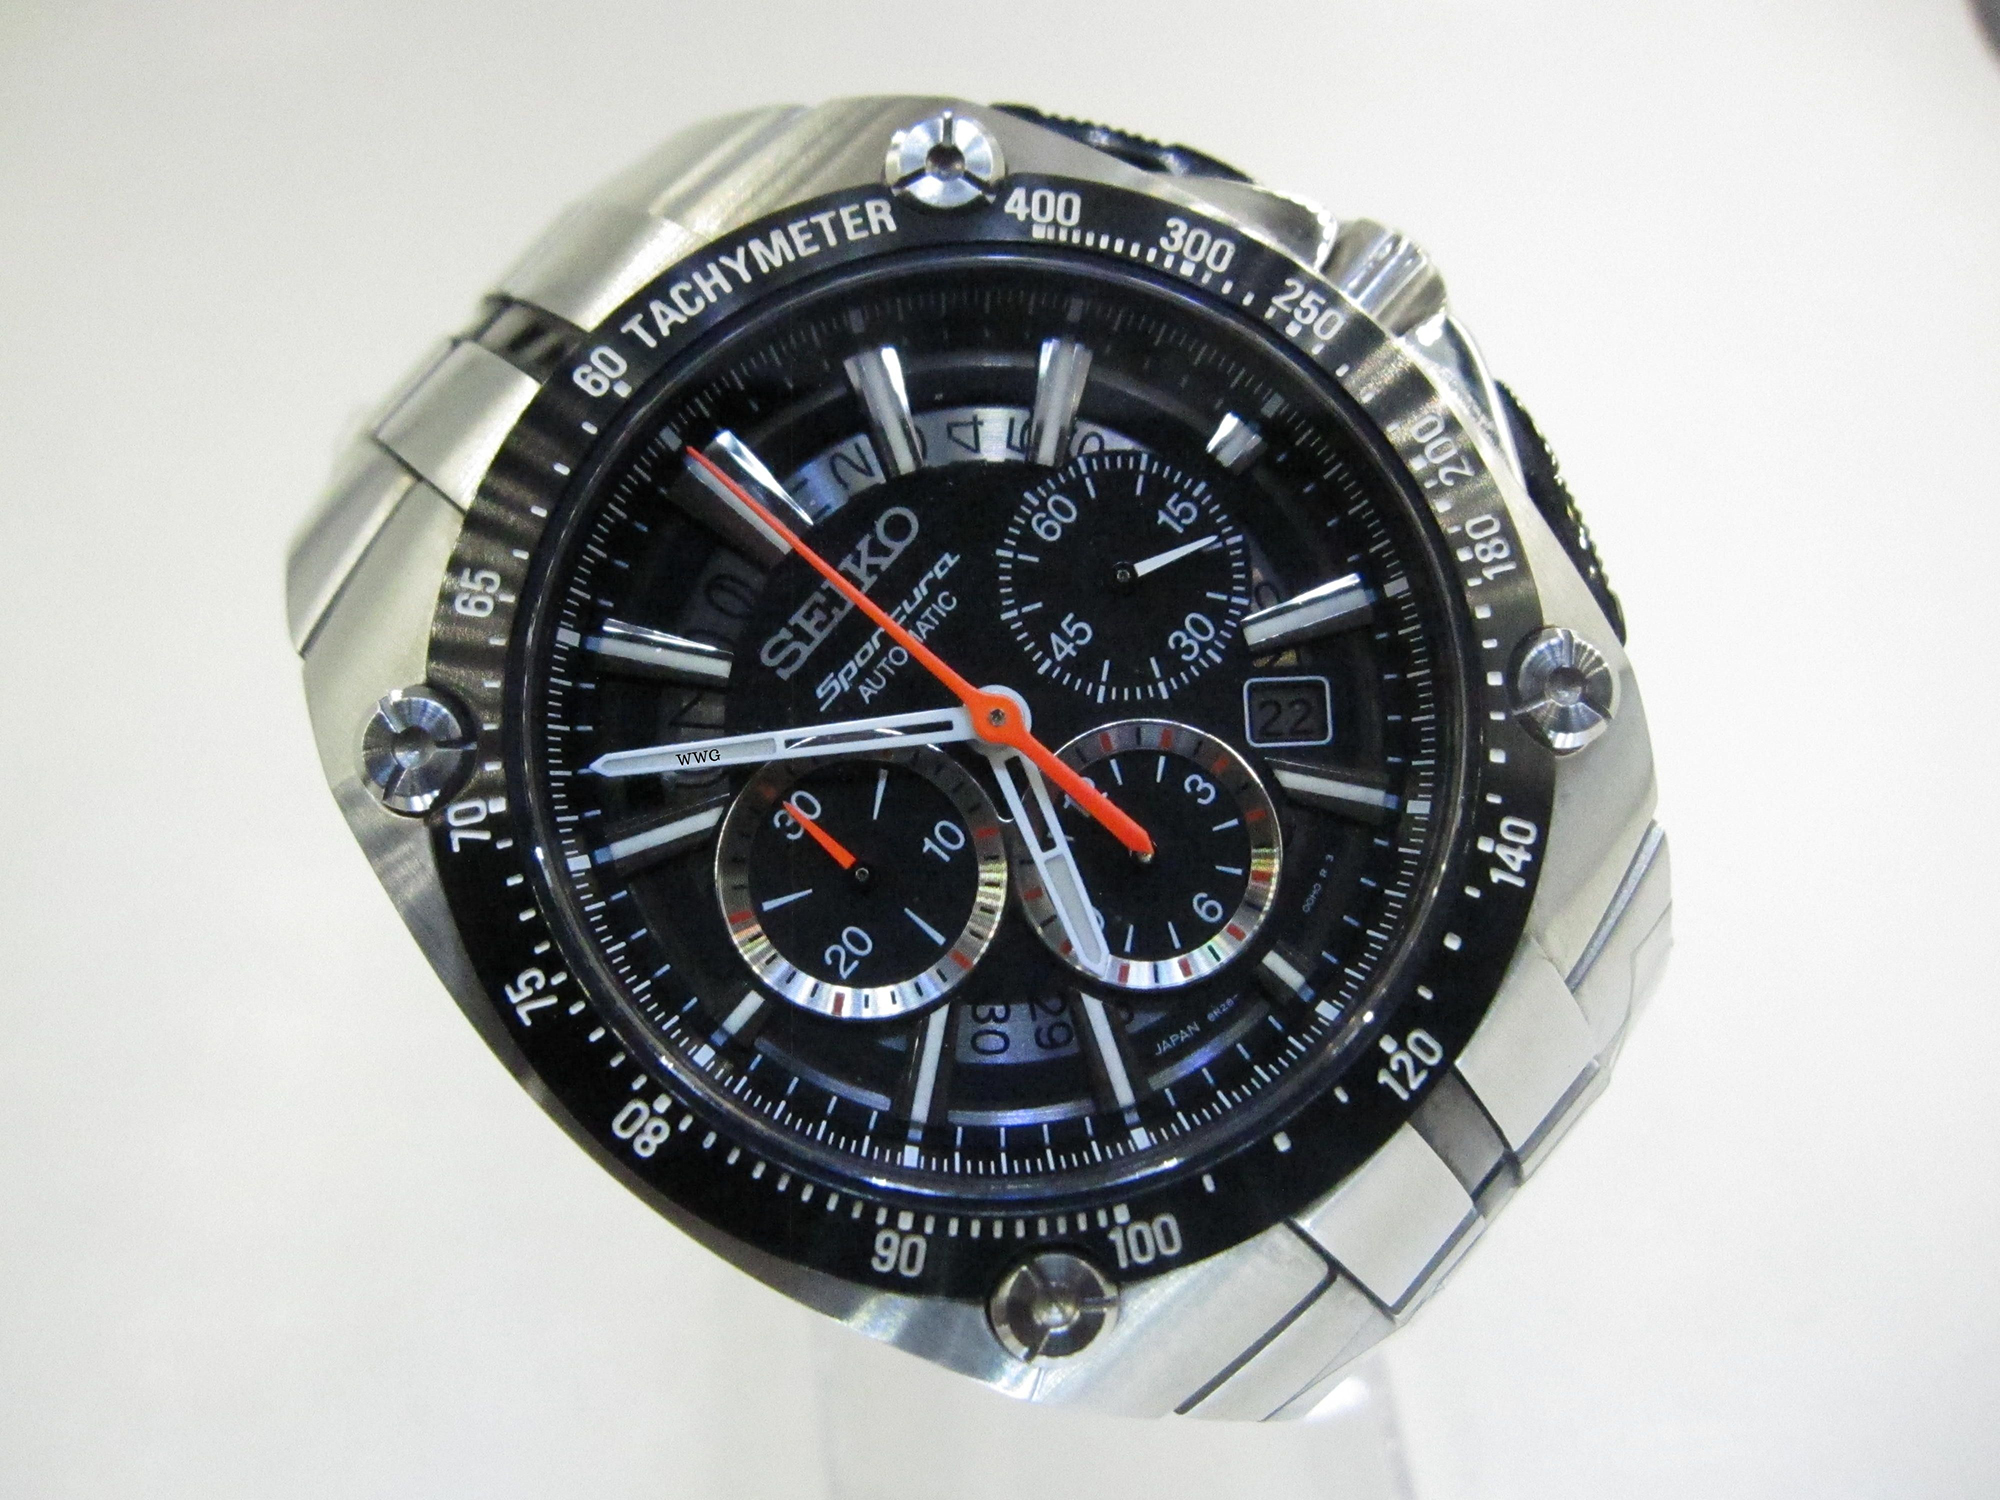 Seiko Sportura Chronograph SRQ007 Limited Edition (Pre Owned) SEIKO-008 -  Watch & Watch Gallery